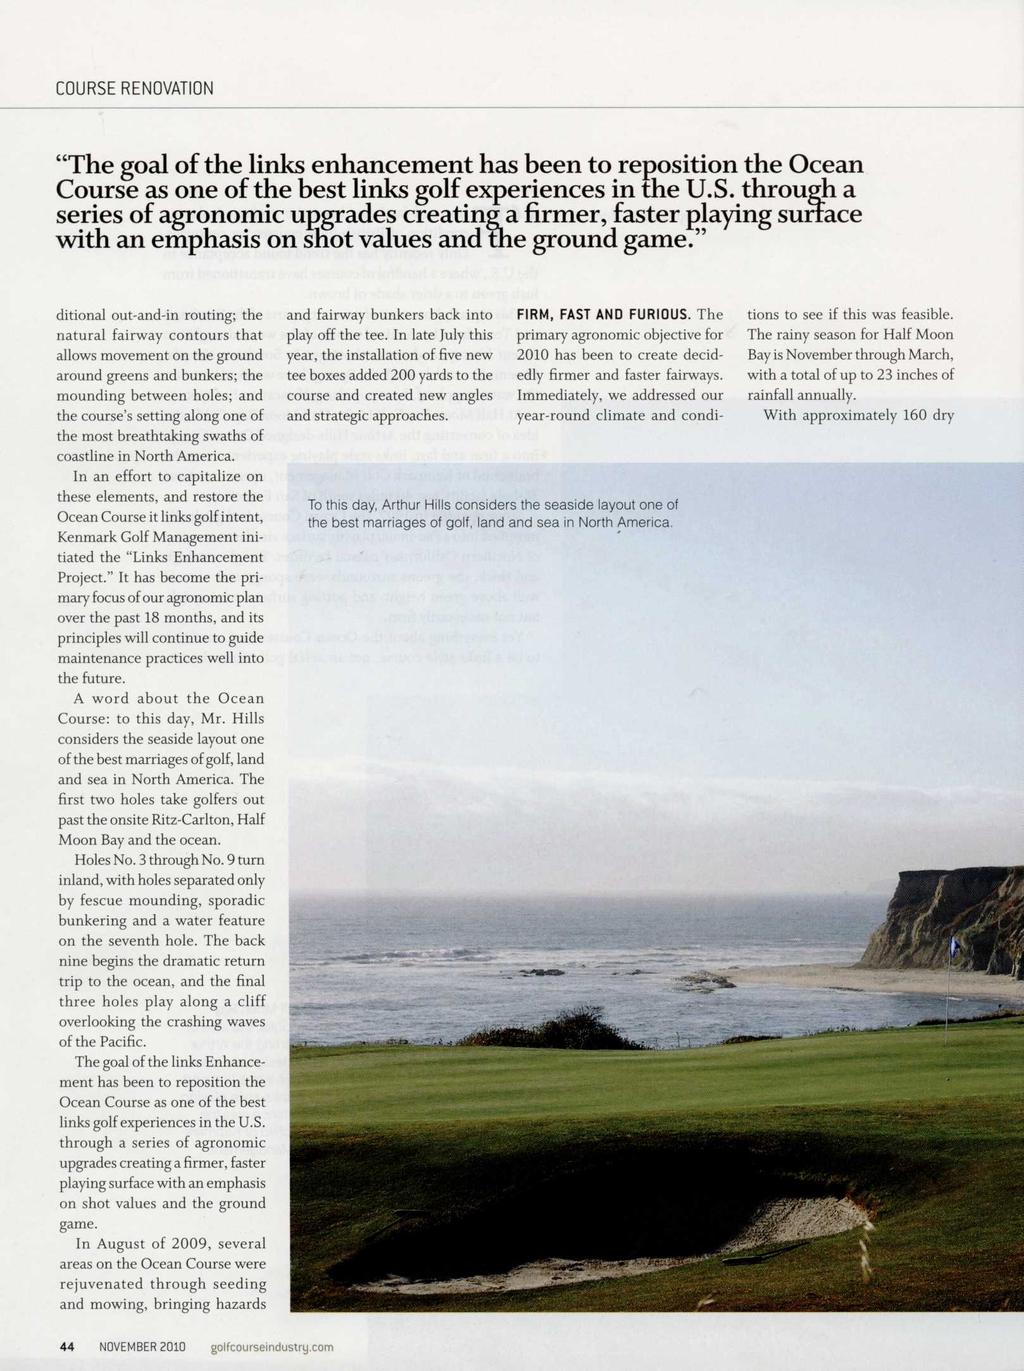 "The goal of the links enhancement has been to reposition the Ocean Course as one of the best links golf experiences in the U.S.